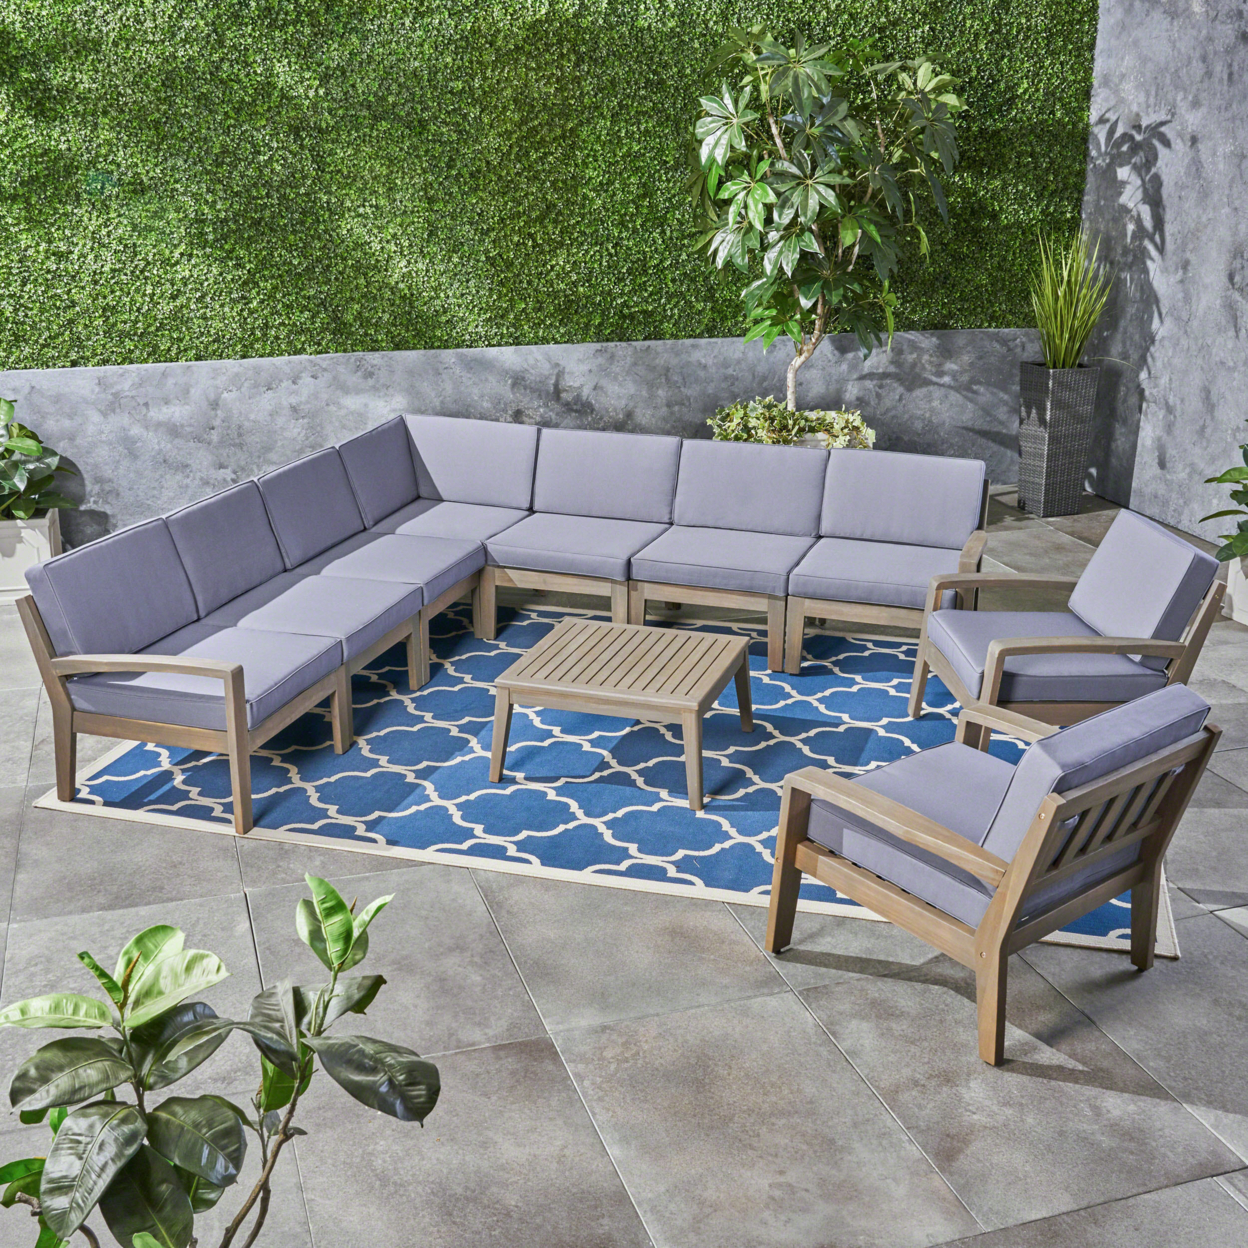 Madeline Outdoor Acacia Wood 9 Seater Sectional Sofa And Club Chair Set With Coffee Table - Dark Gray